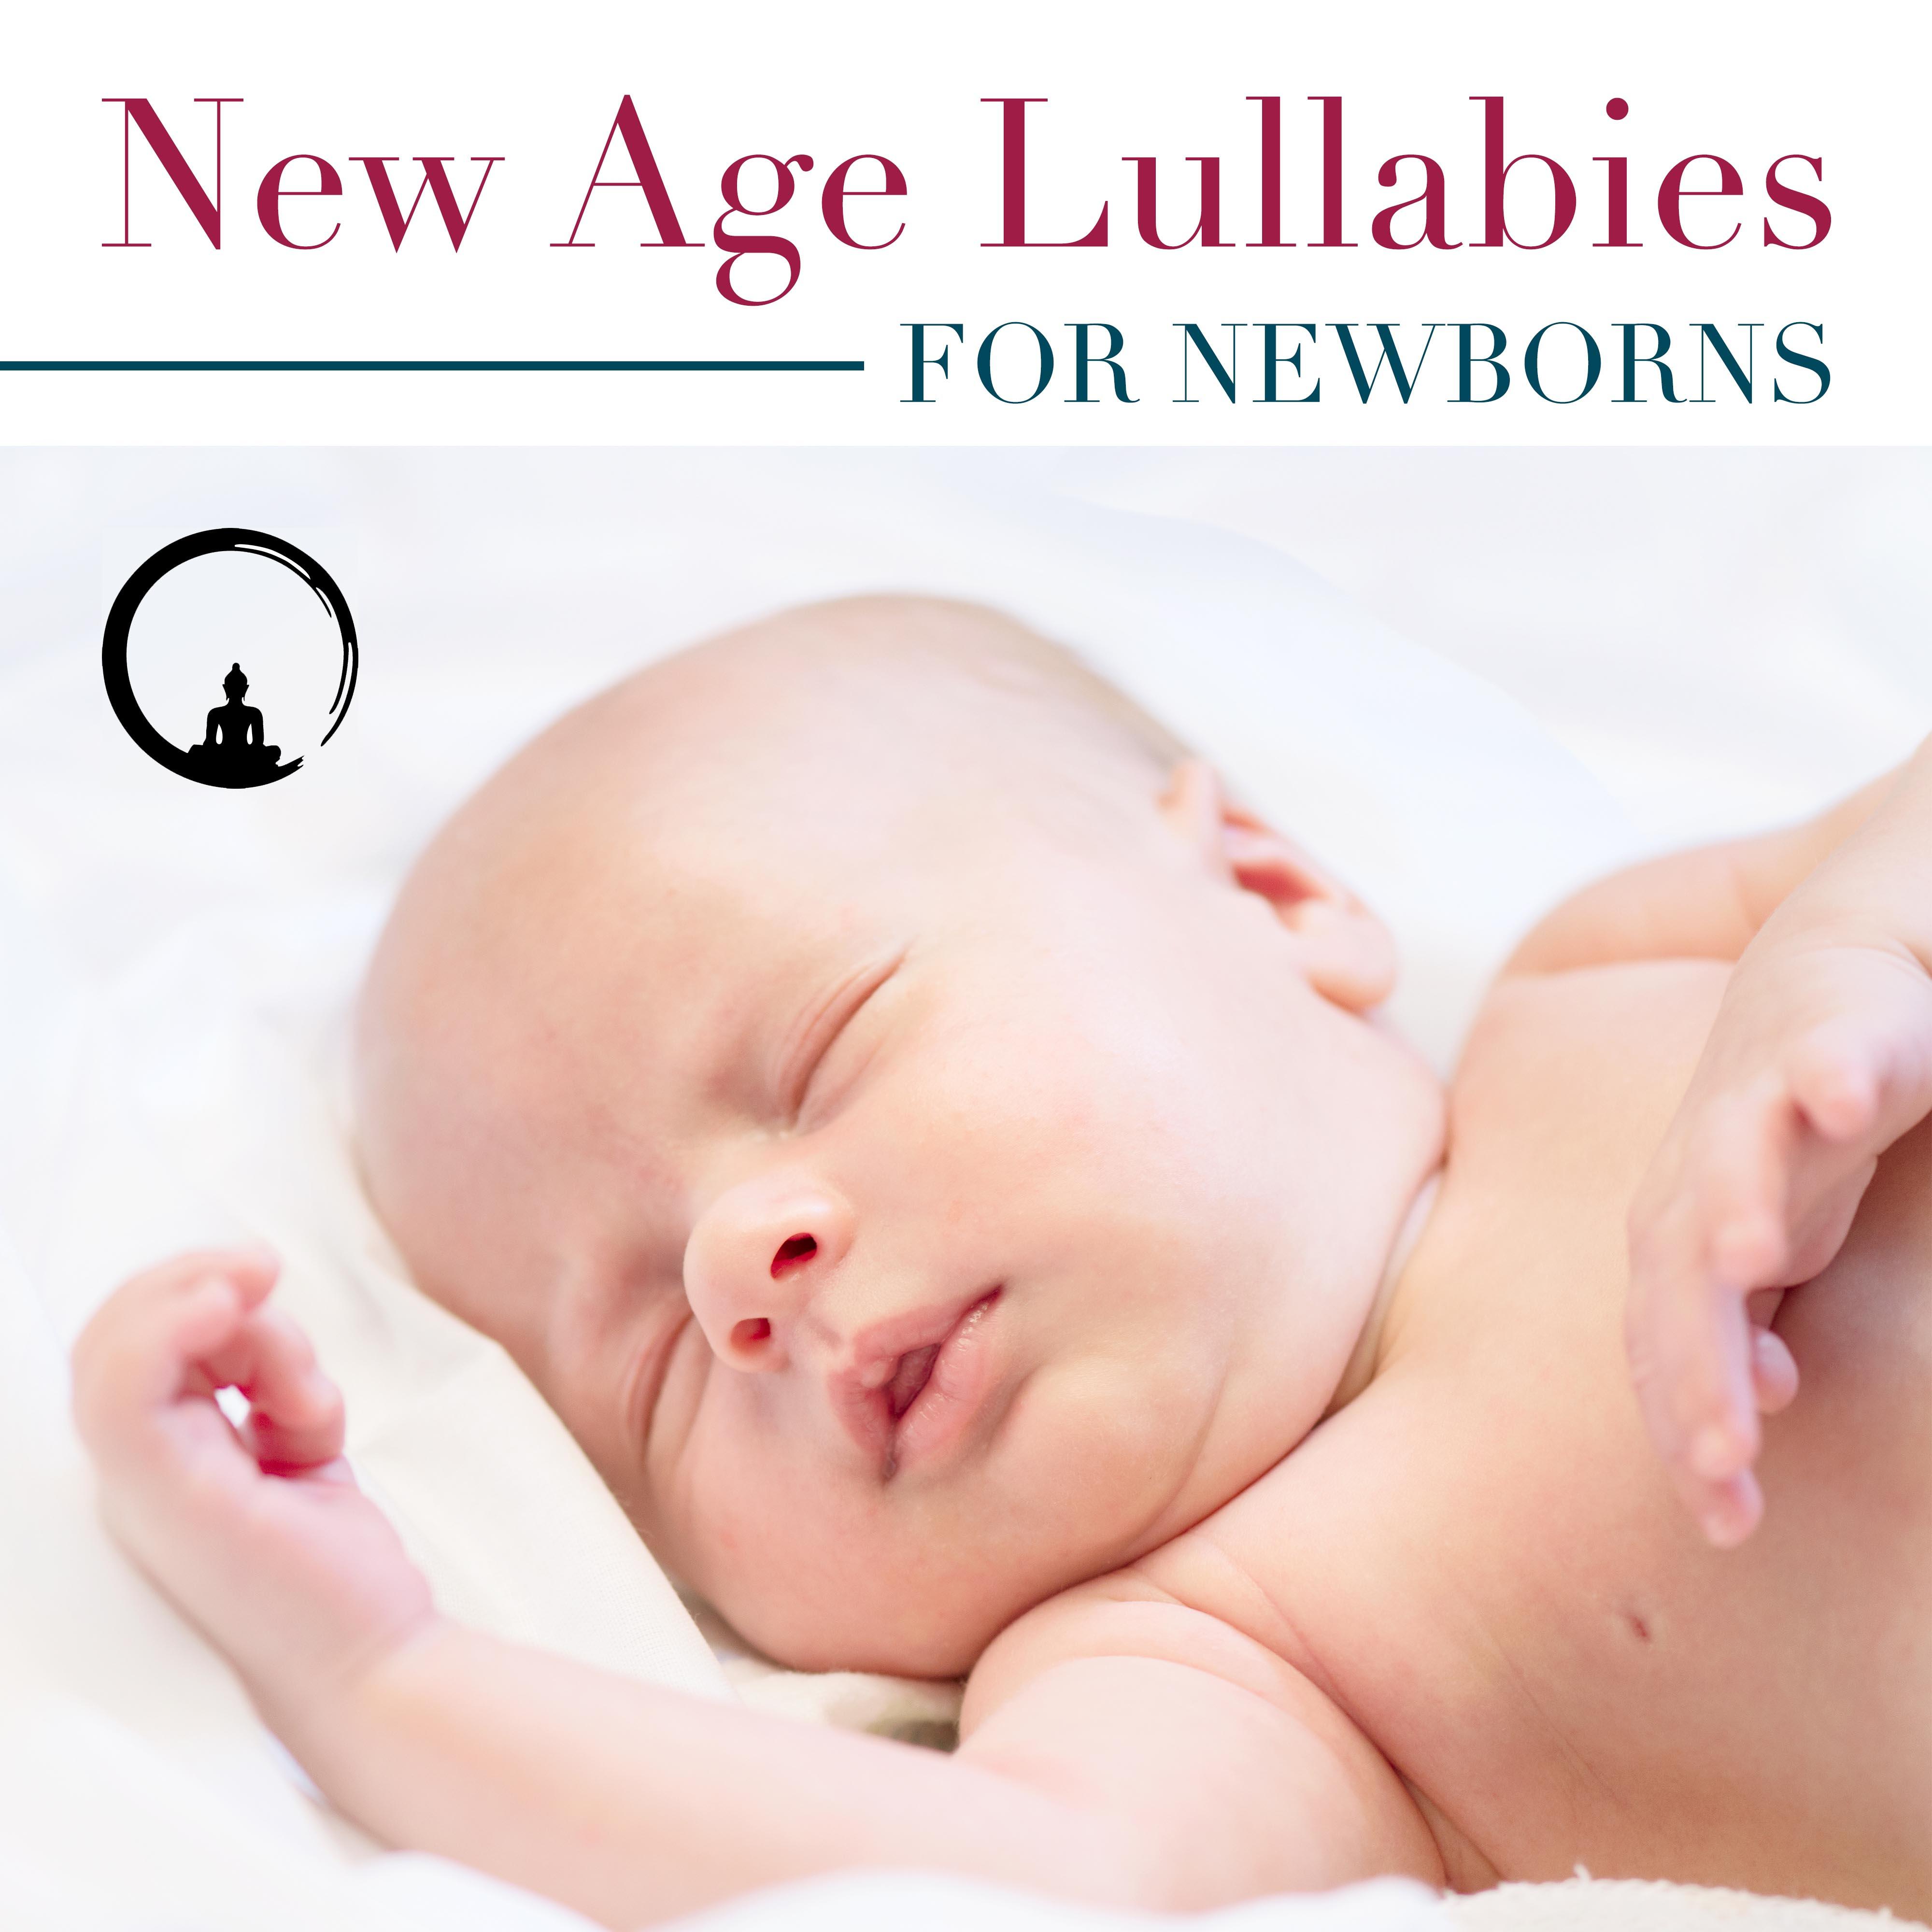 New Age Lullabies for Newborns - Extremely Relaxing Sleep Music